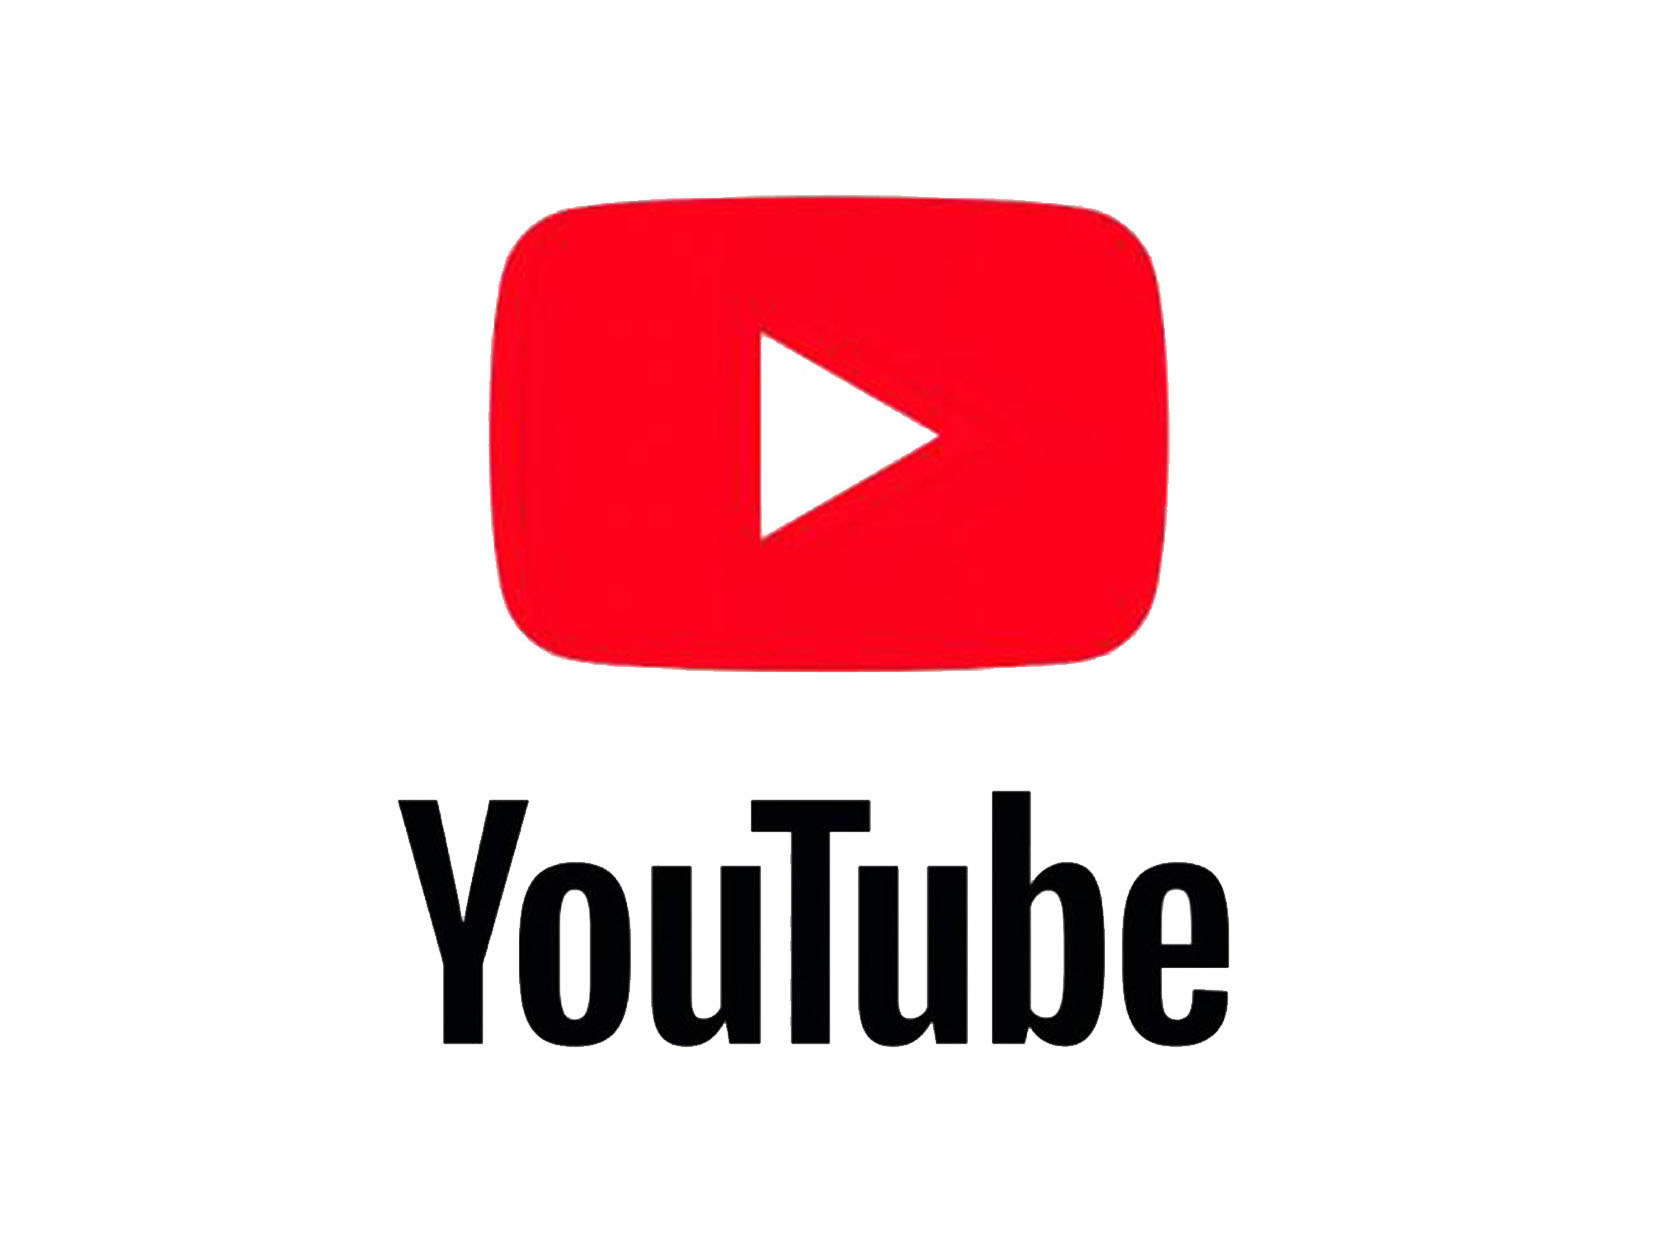 YouTube ad revenue growth in Q2 is the slowest in over two years